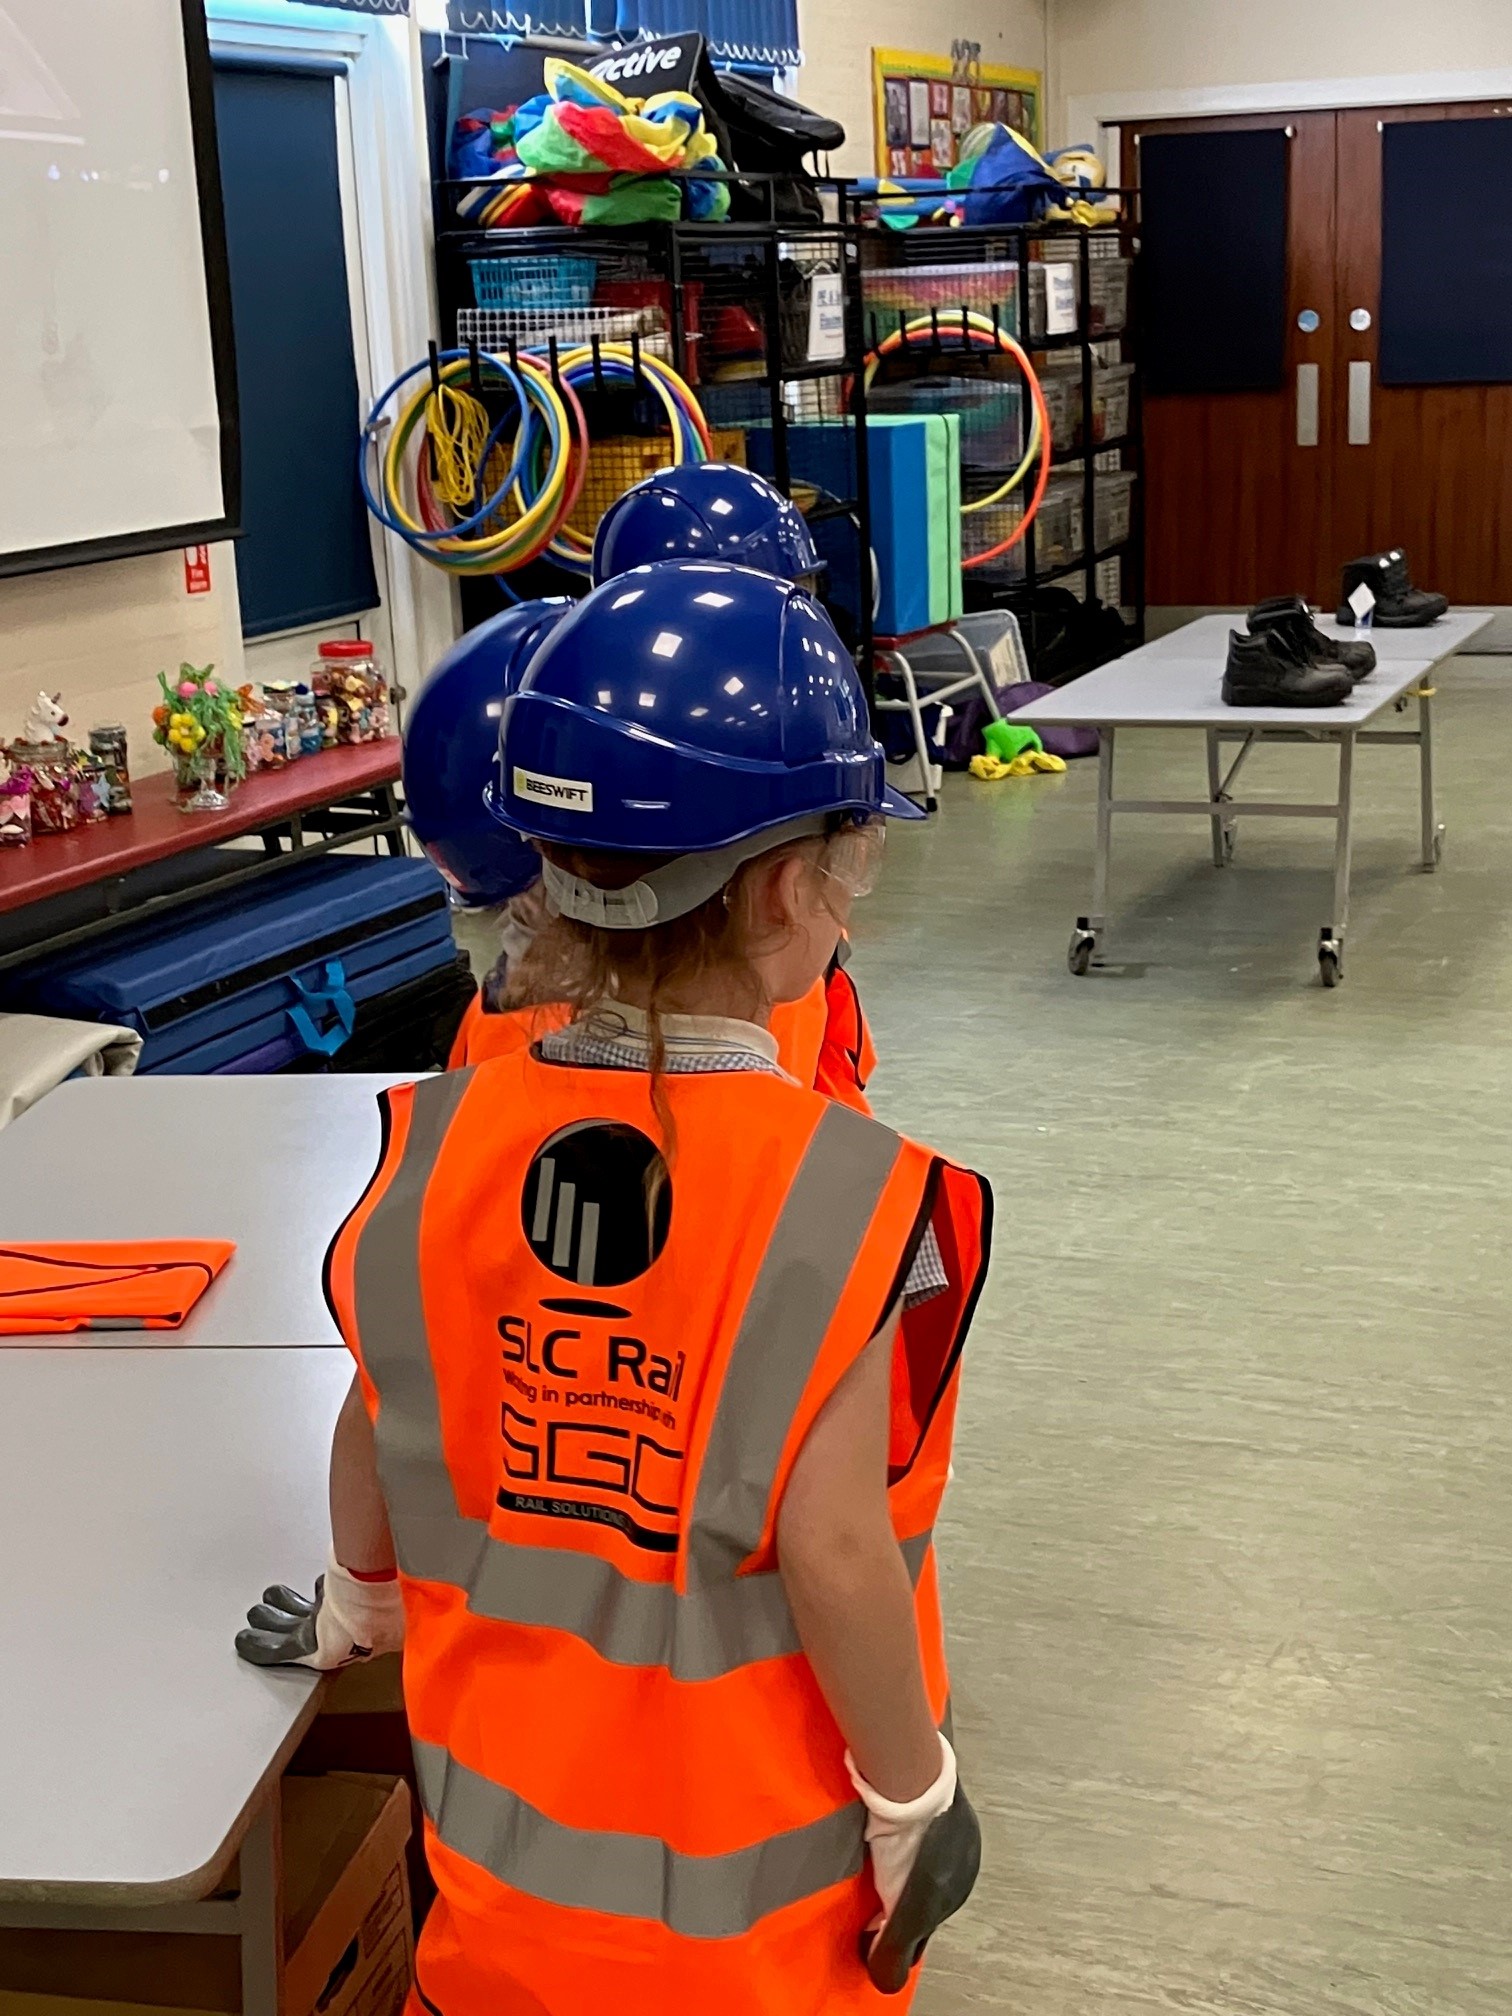 Image description: Above children enjoyed the chance to try on Personal Protective Equipment (PPE).